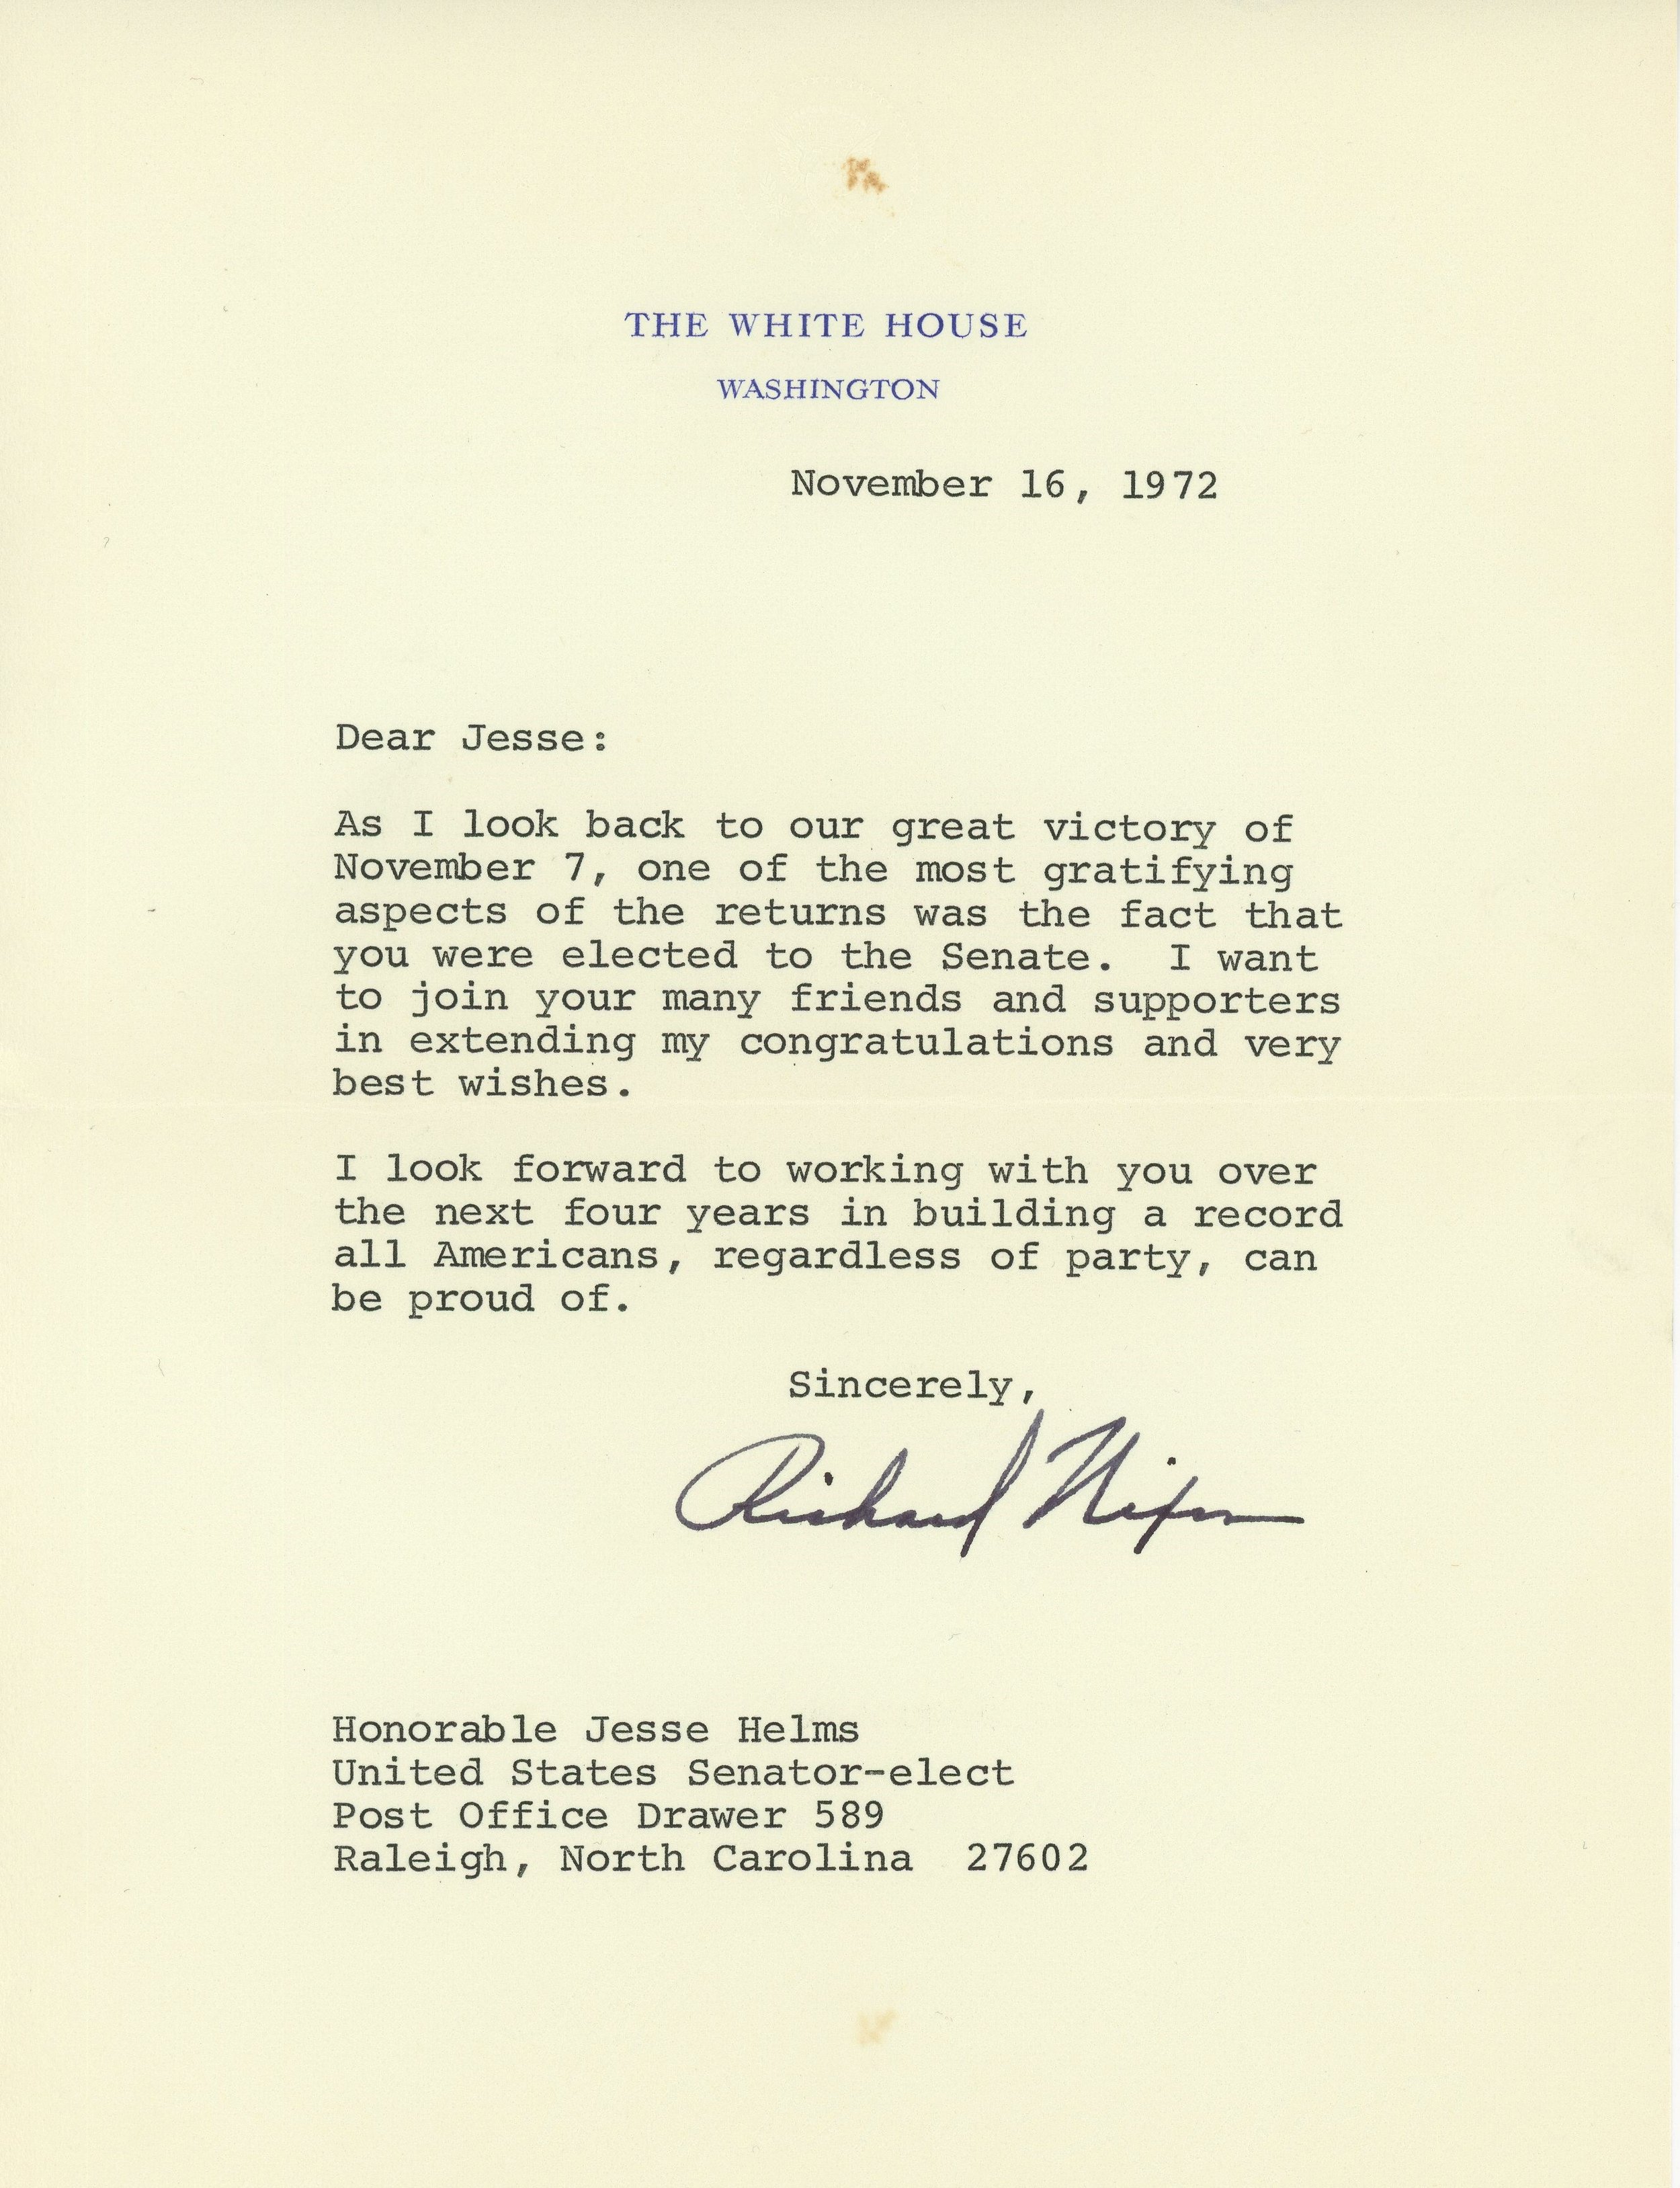 Letter of congratulations to newly elected Senator Jesse Helms from President Richard Nixon.